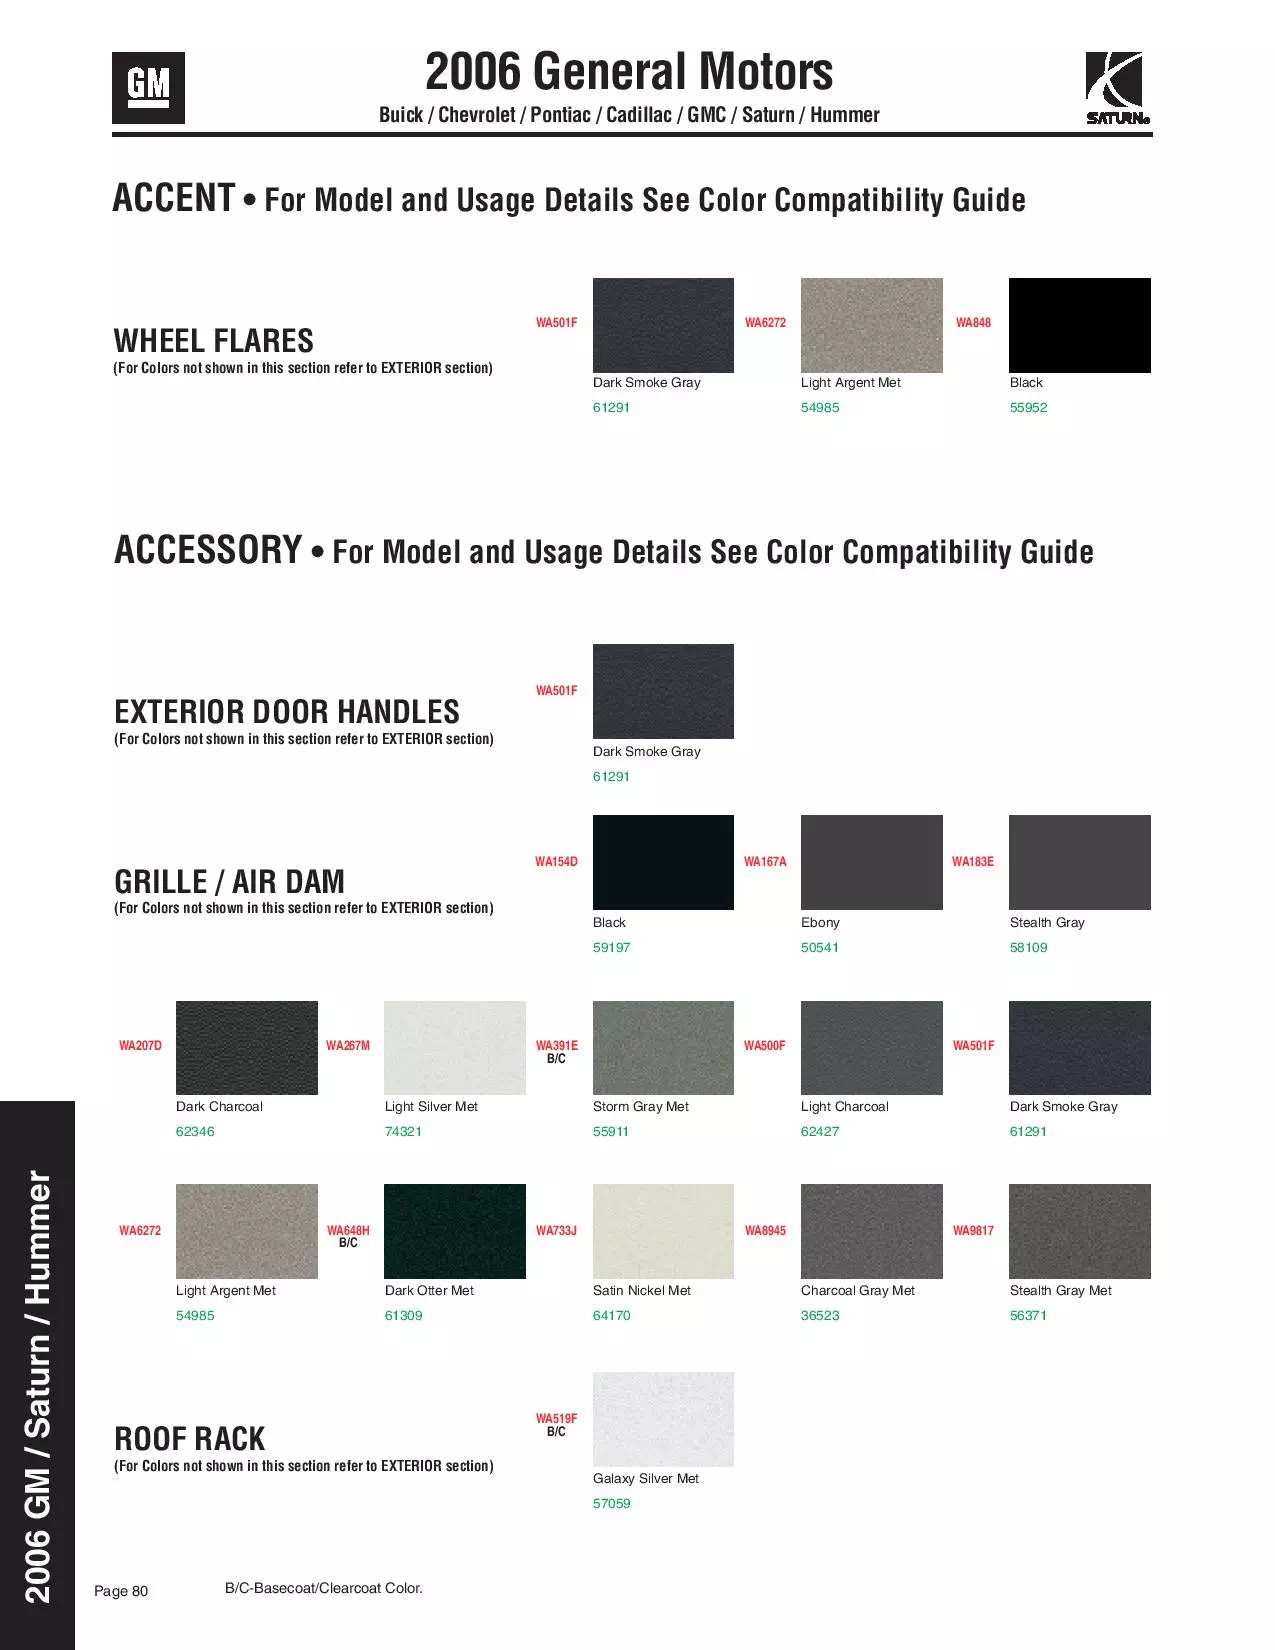 Paint Codes and colors for Buick, Cadillac, Chevy, GMC, Pontiac, and Saturn